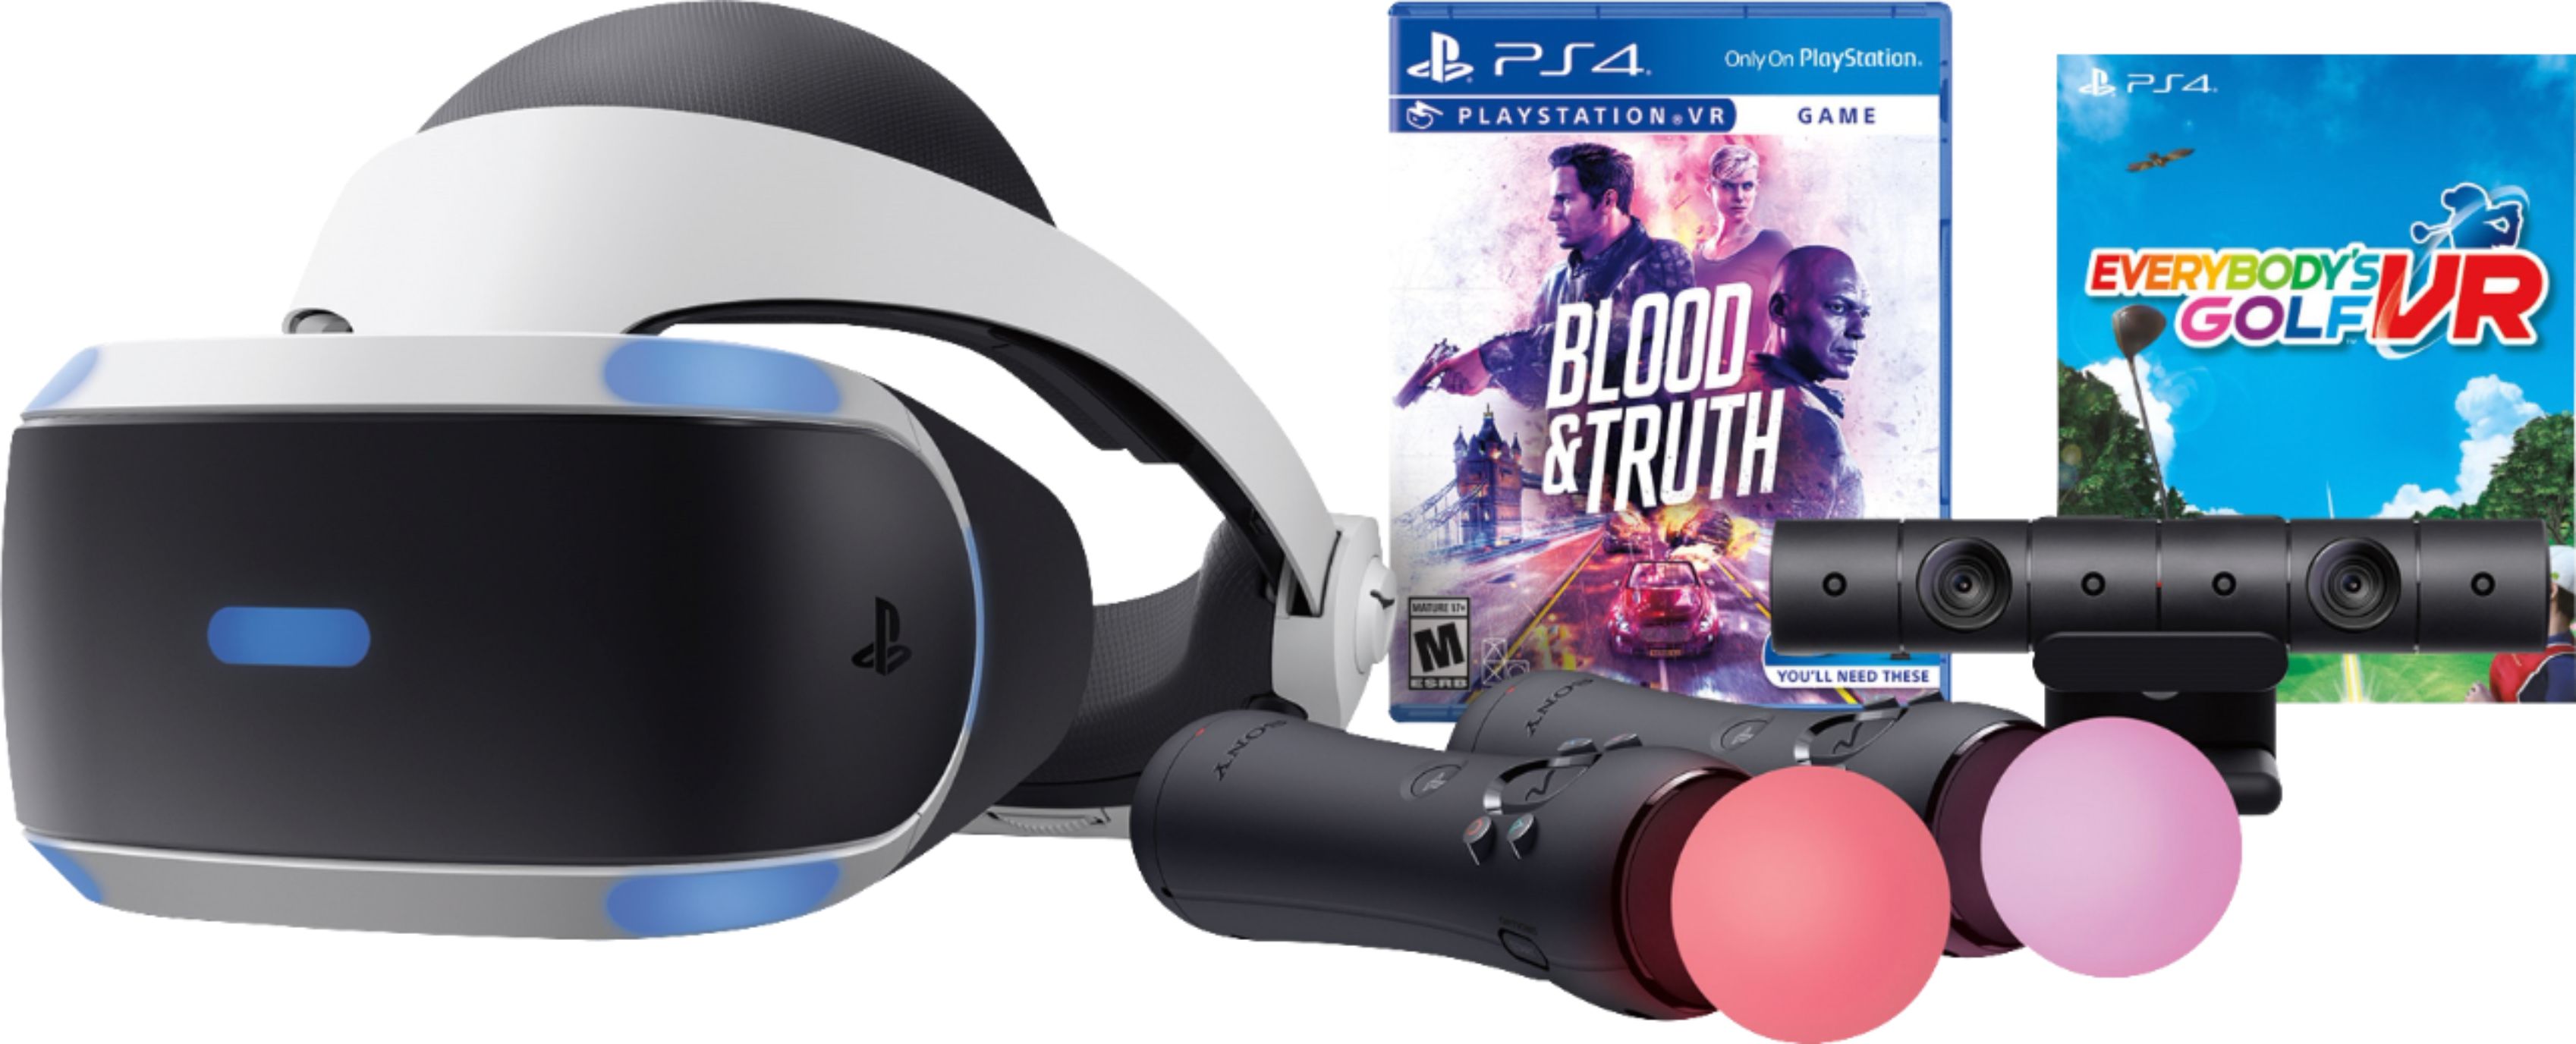 Best Buy: Sony PlayStation VR Blood & Truth and Everybody's Golf